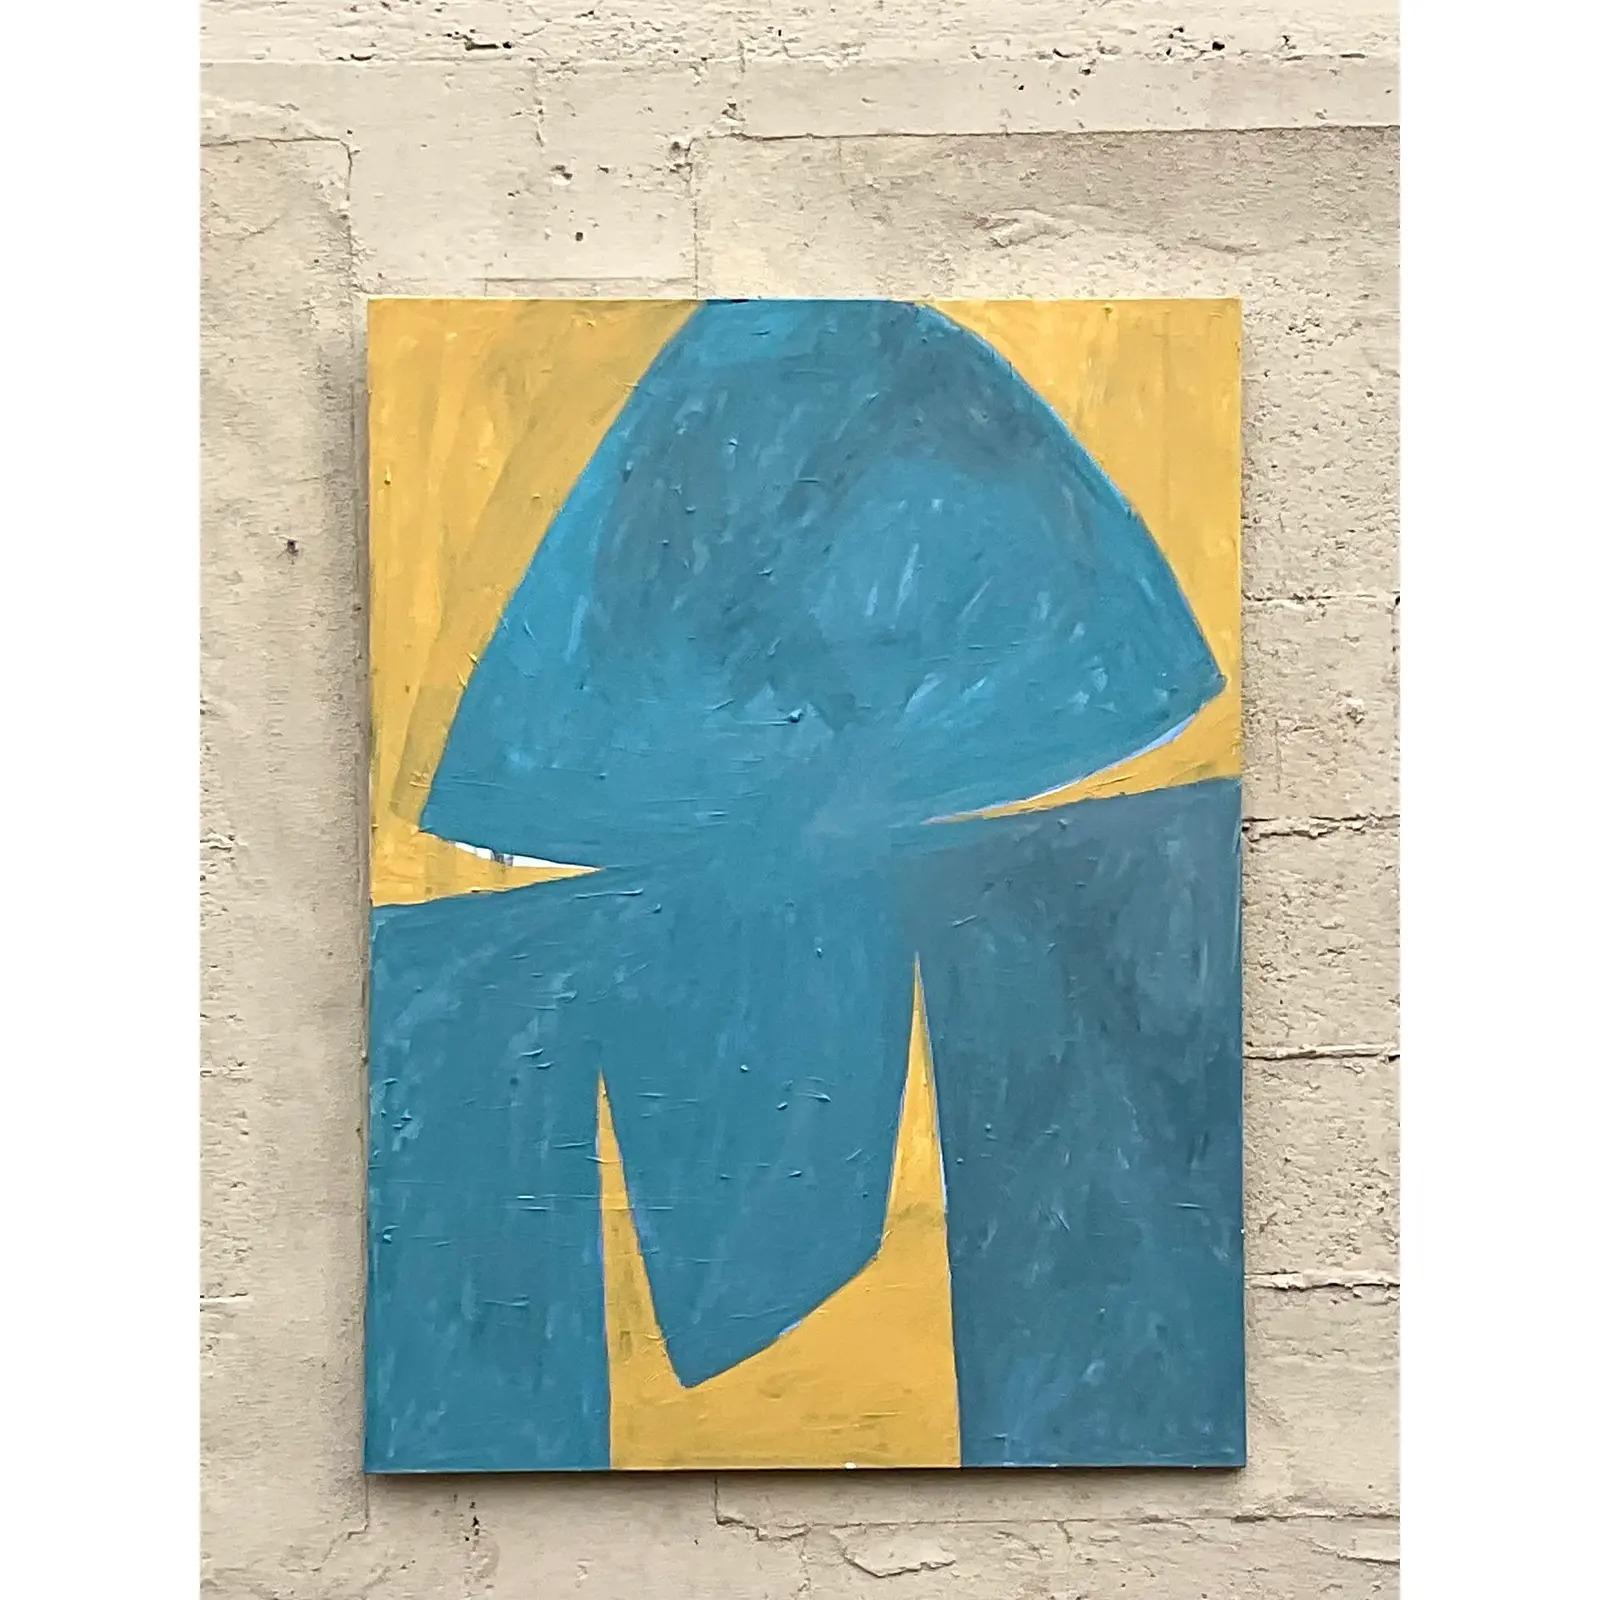 A fabulous vintage Contemporary original oil painting. A stunning geometric abstract in muted colors. Unsigned. Acquired from a Palm Beach estate.